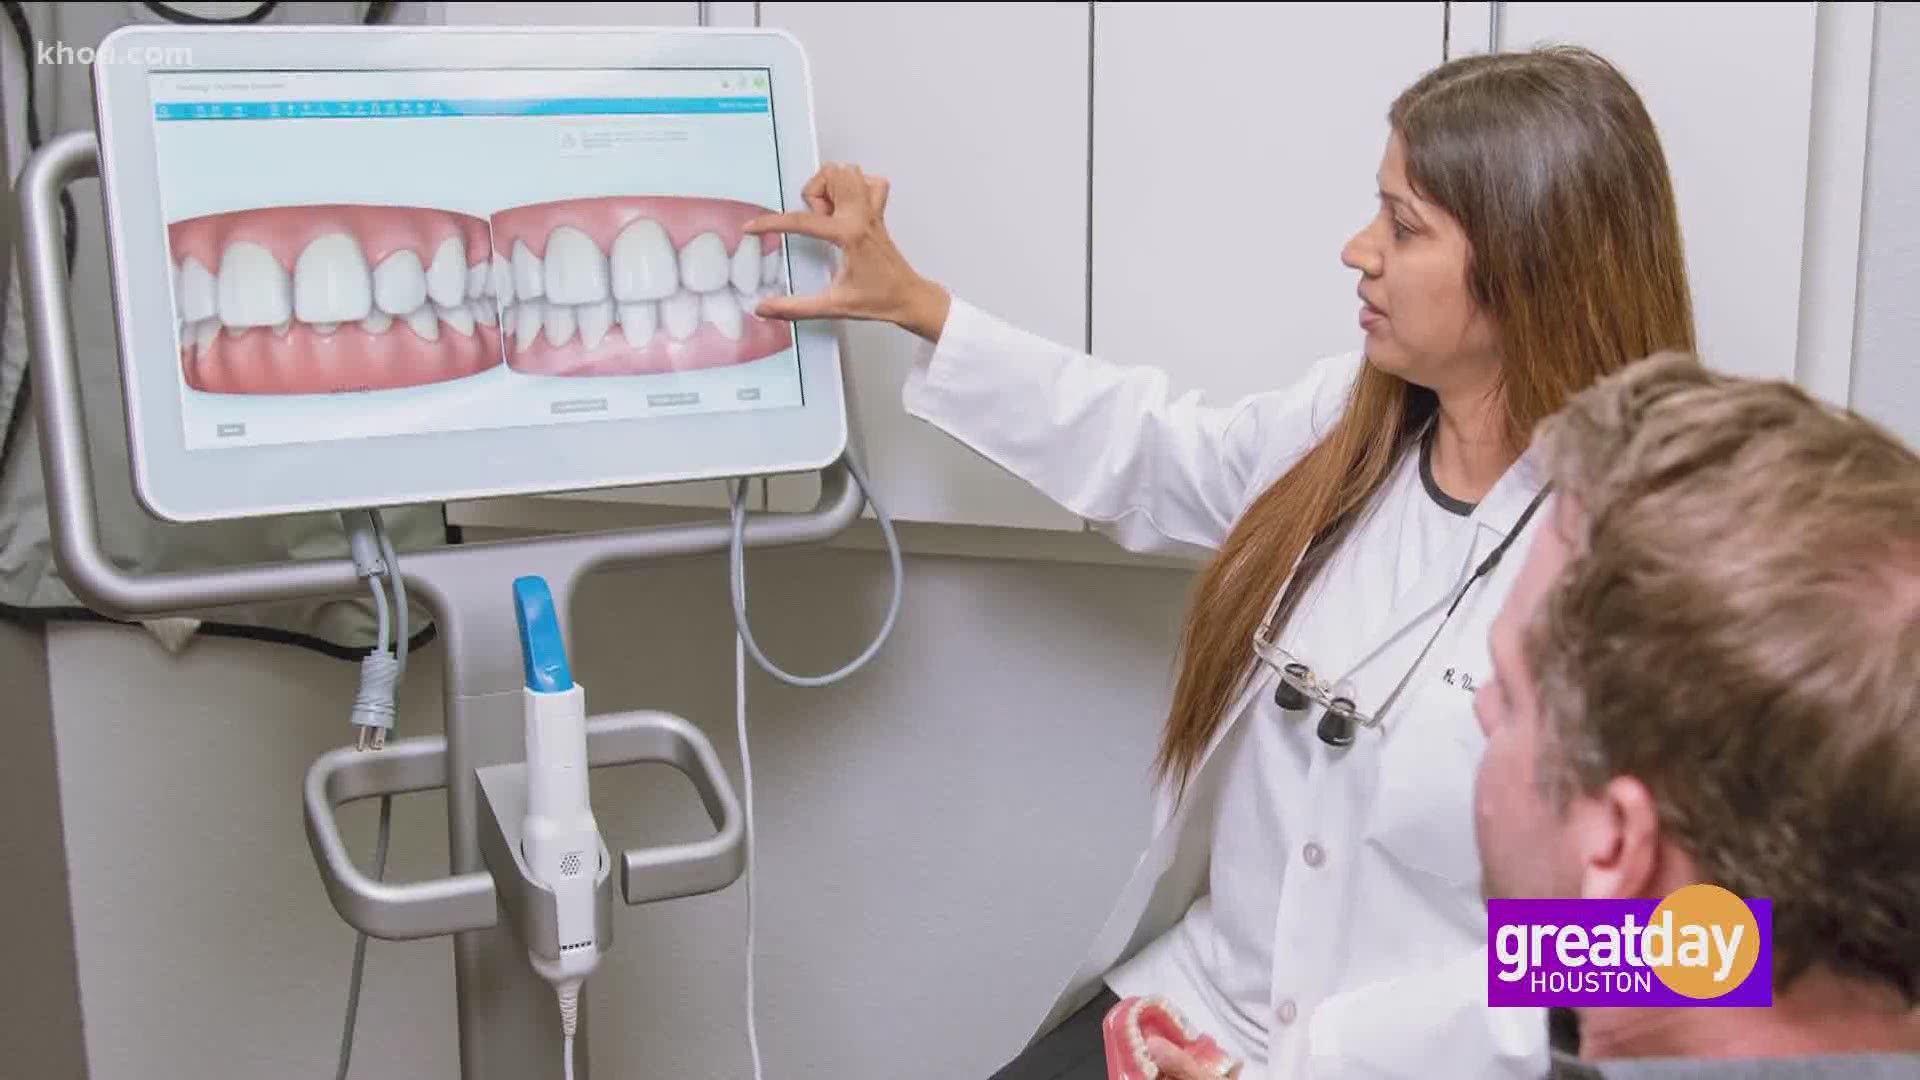 Dr. Rohit Chaudhari, with Jefferson Dental & Orthodontics explains how their practice is making oral care accessible for everyone.